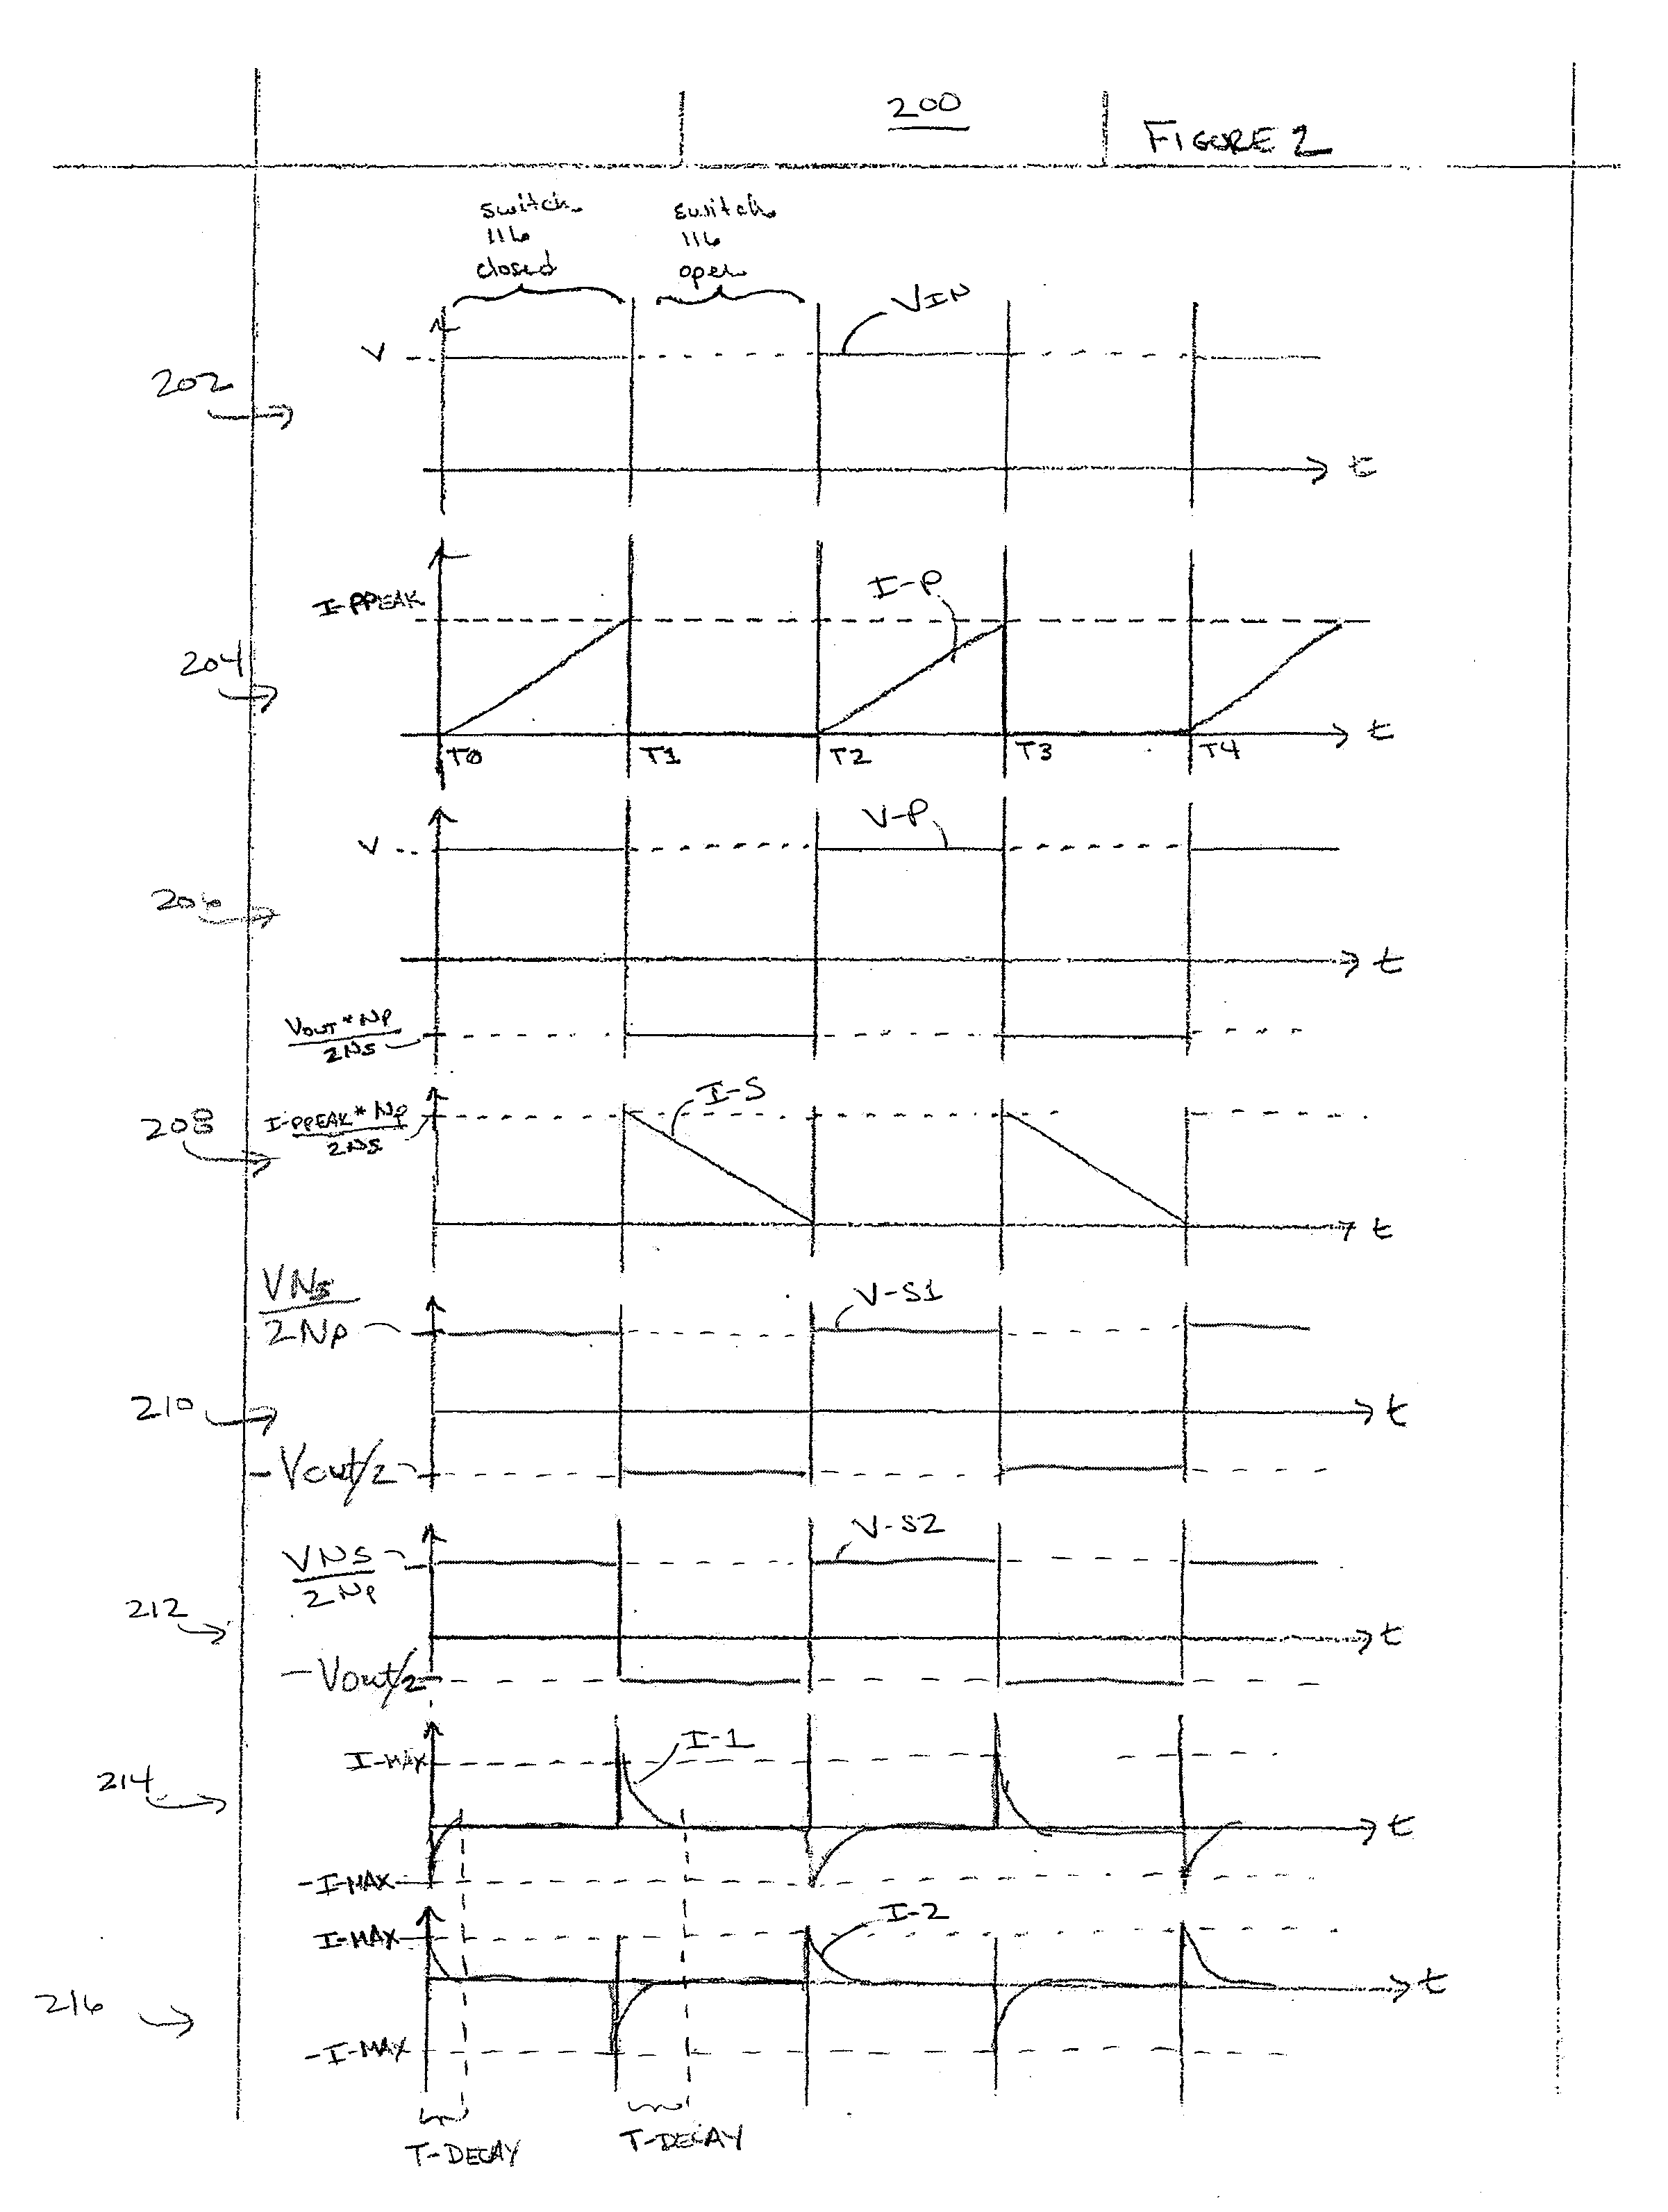 Electromagnetic interference cancelling during power conversion